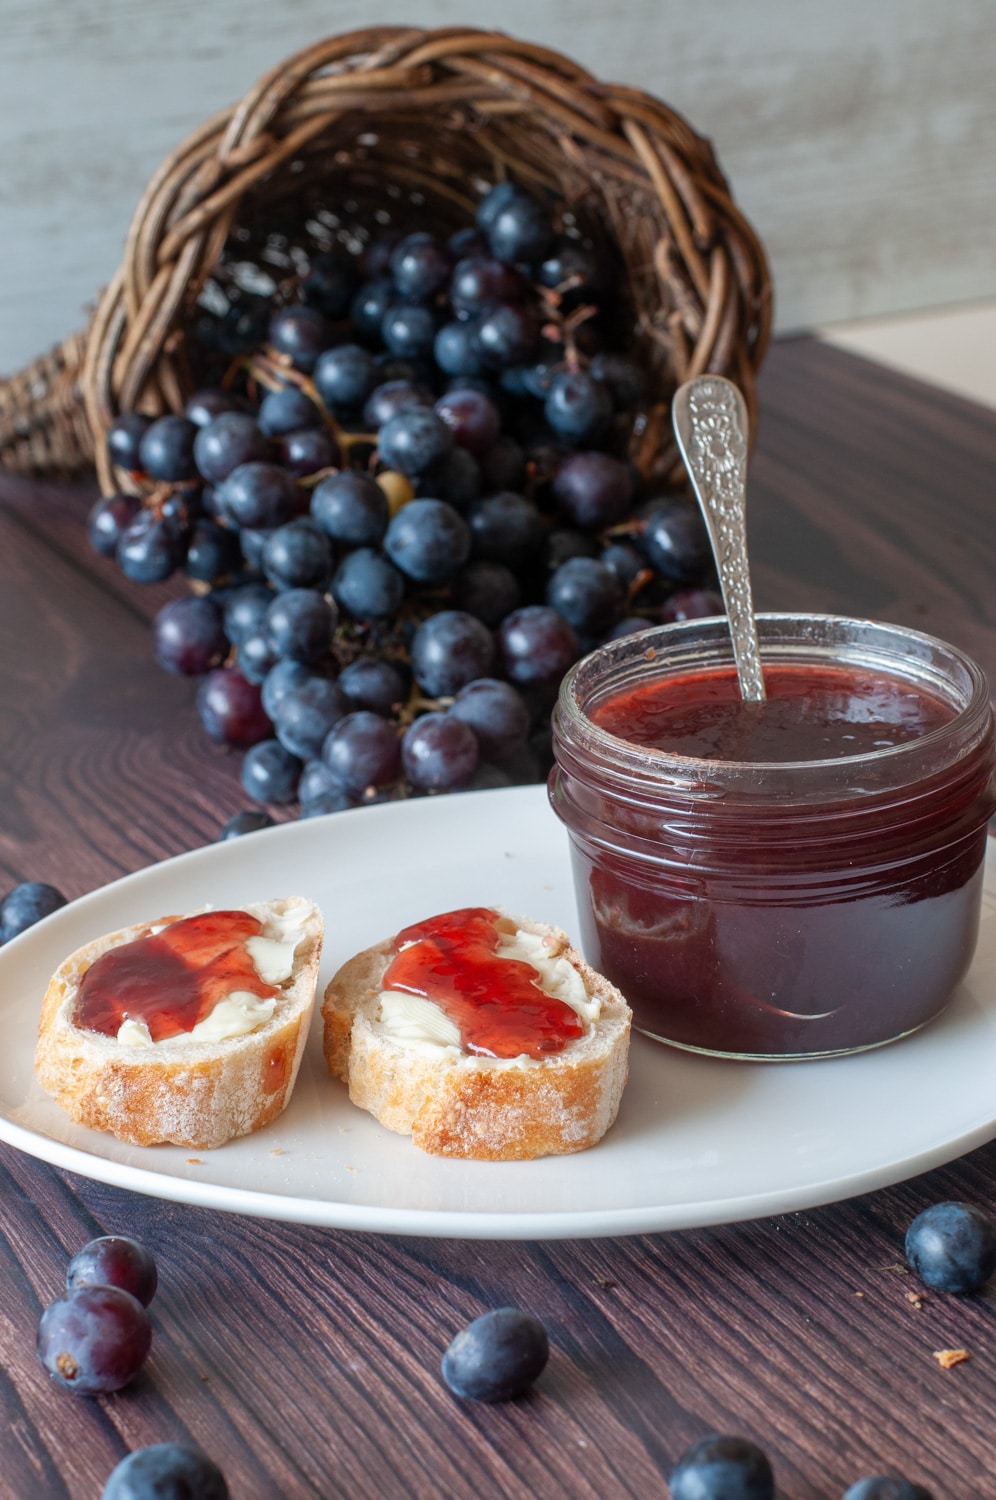 Eating the grape jam with bread and butter